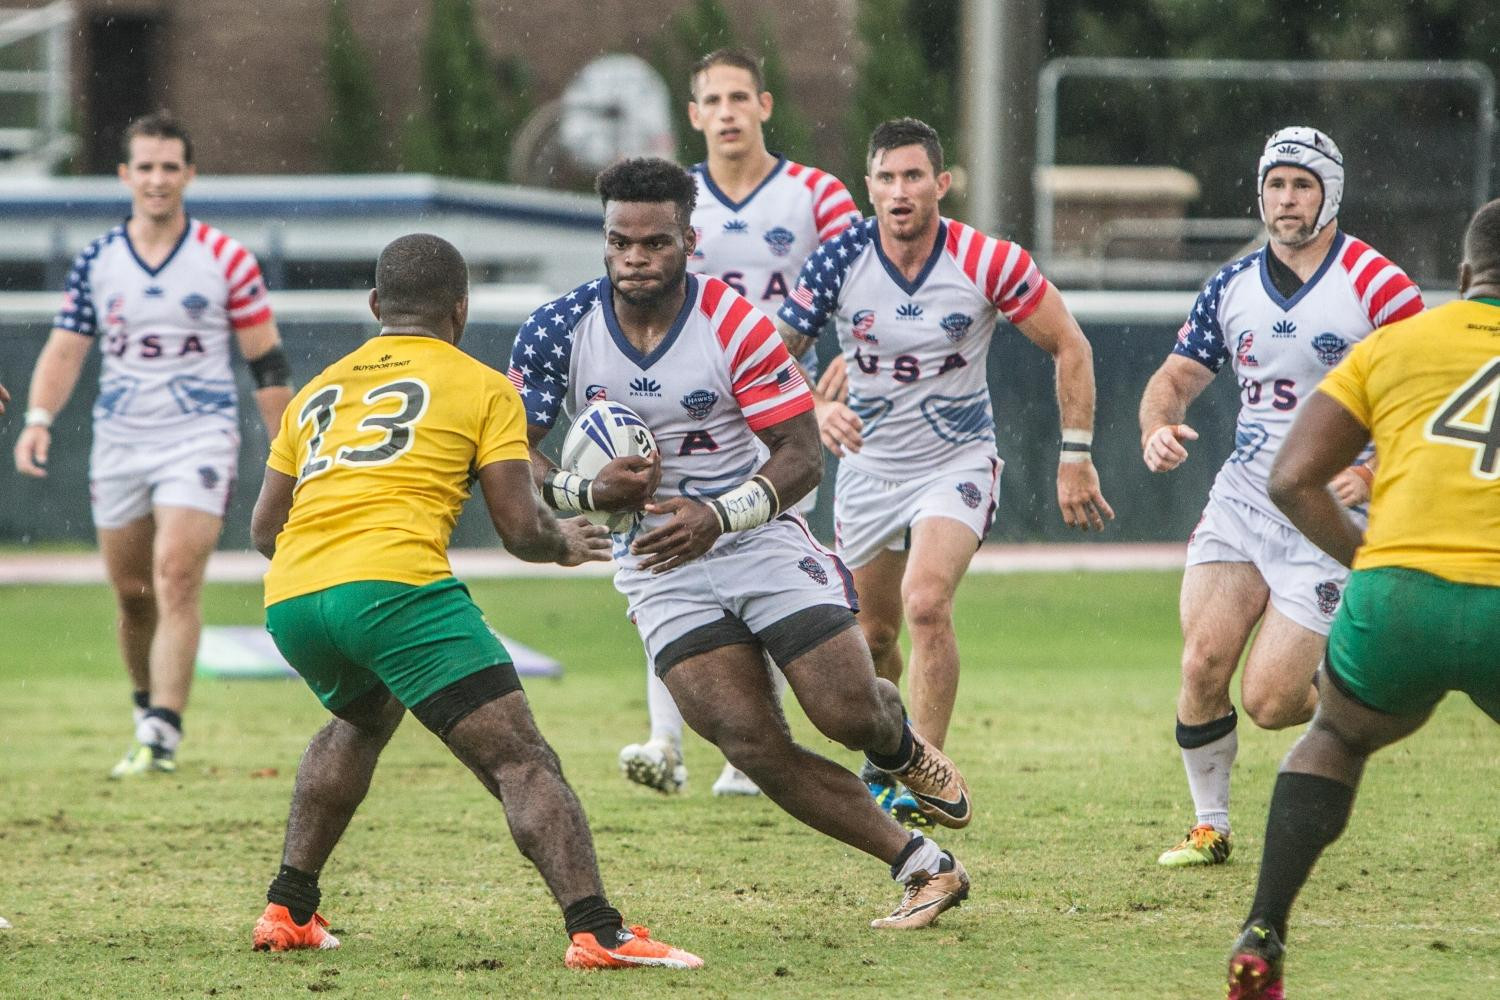 The 2018 Americas Rugby League Championship will take place in Jacksonville this year, which will see USA take on newcomers Chile ©RLIF